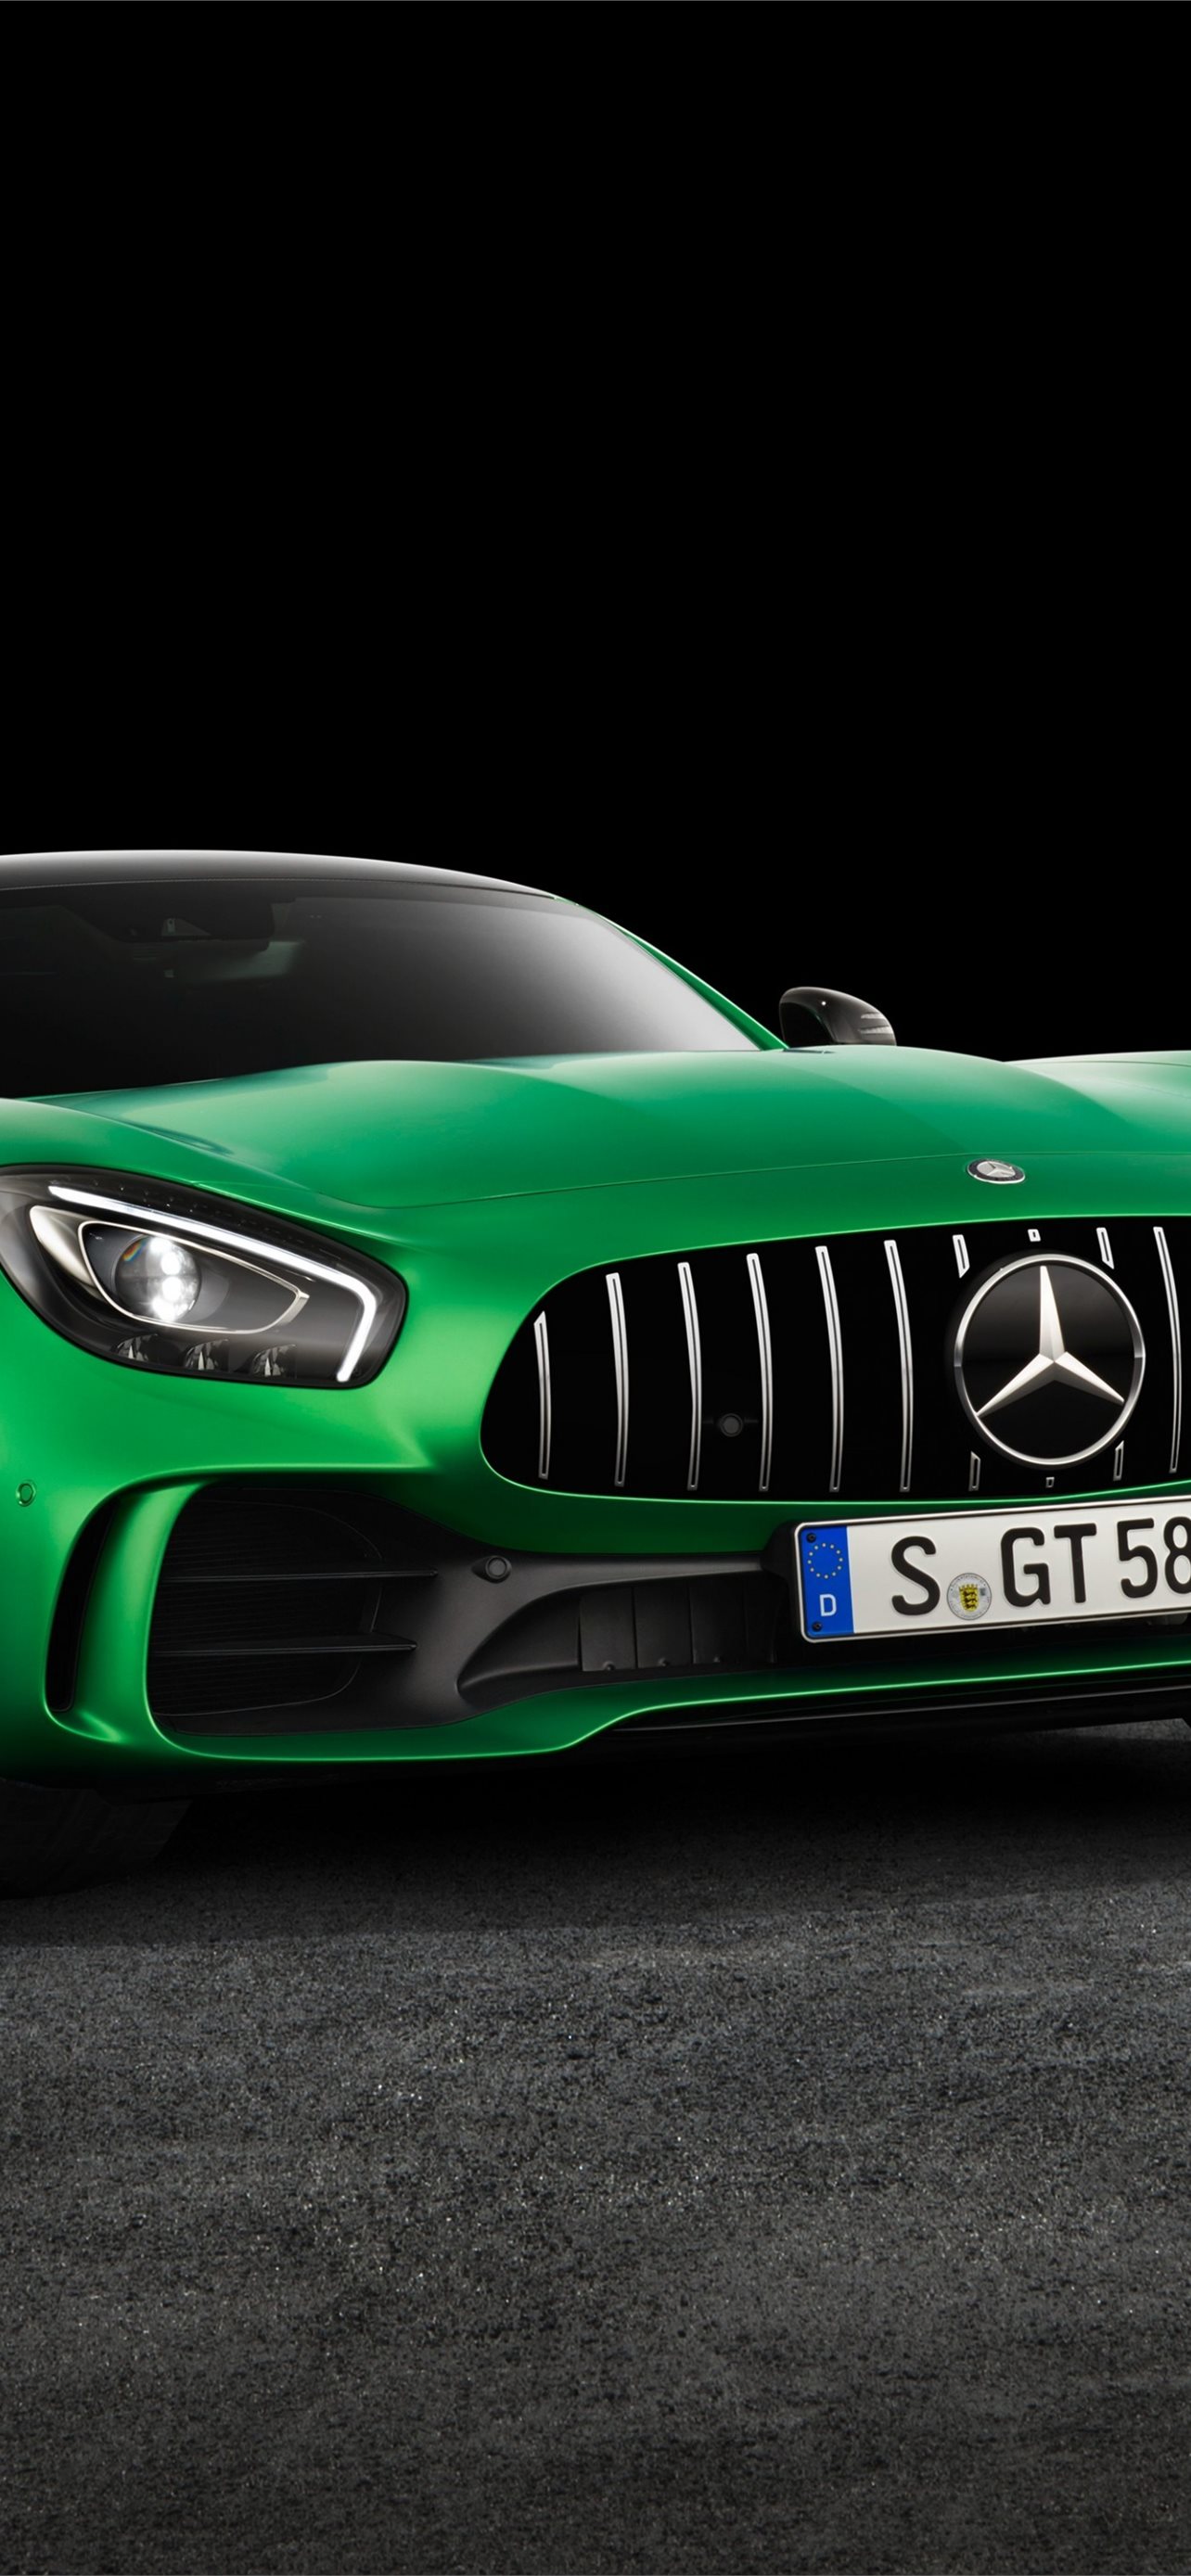 Mercedes Benz Amg Gt Green Sport Cars Amg Gt Panam. iPhone Wallpaper Free Download